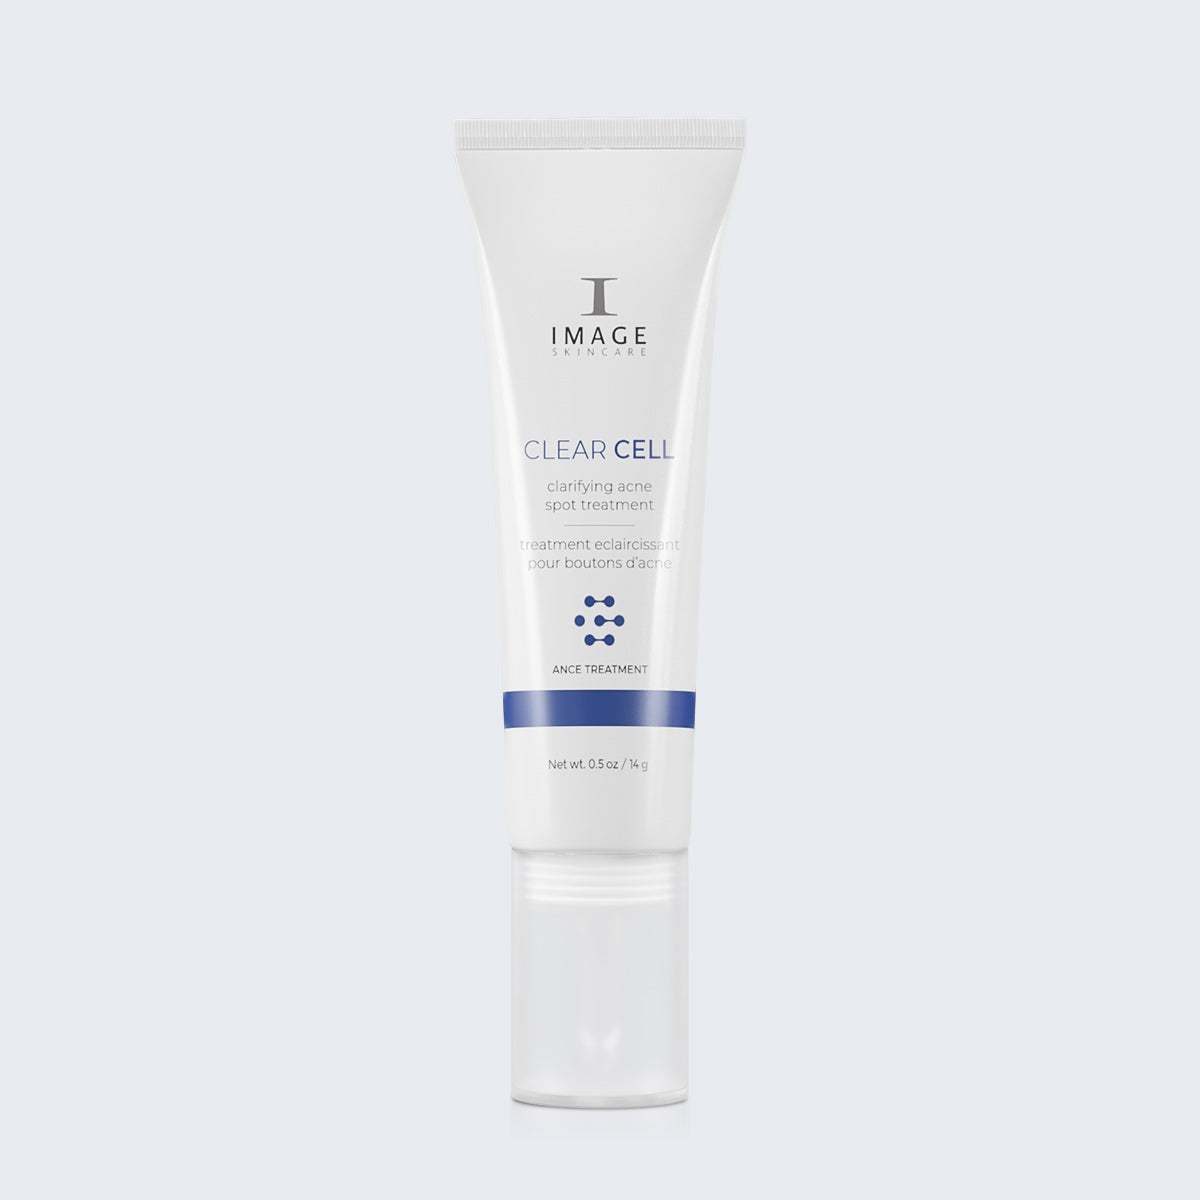 IMAGE | CLEAR CELL Clarifying Acne Spot Treatment (0.5 oz)